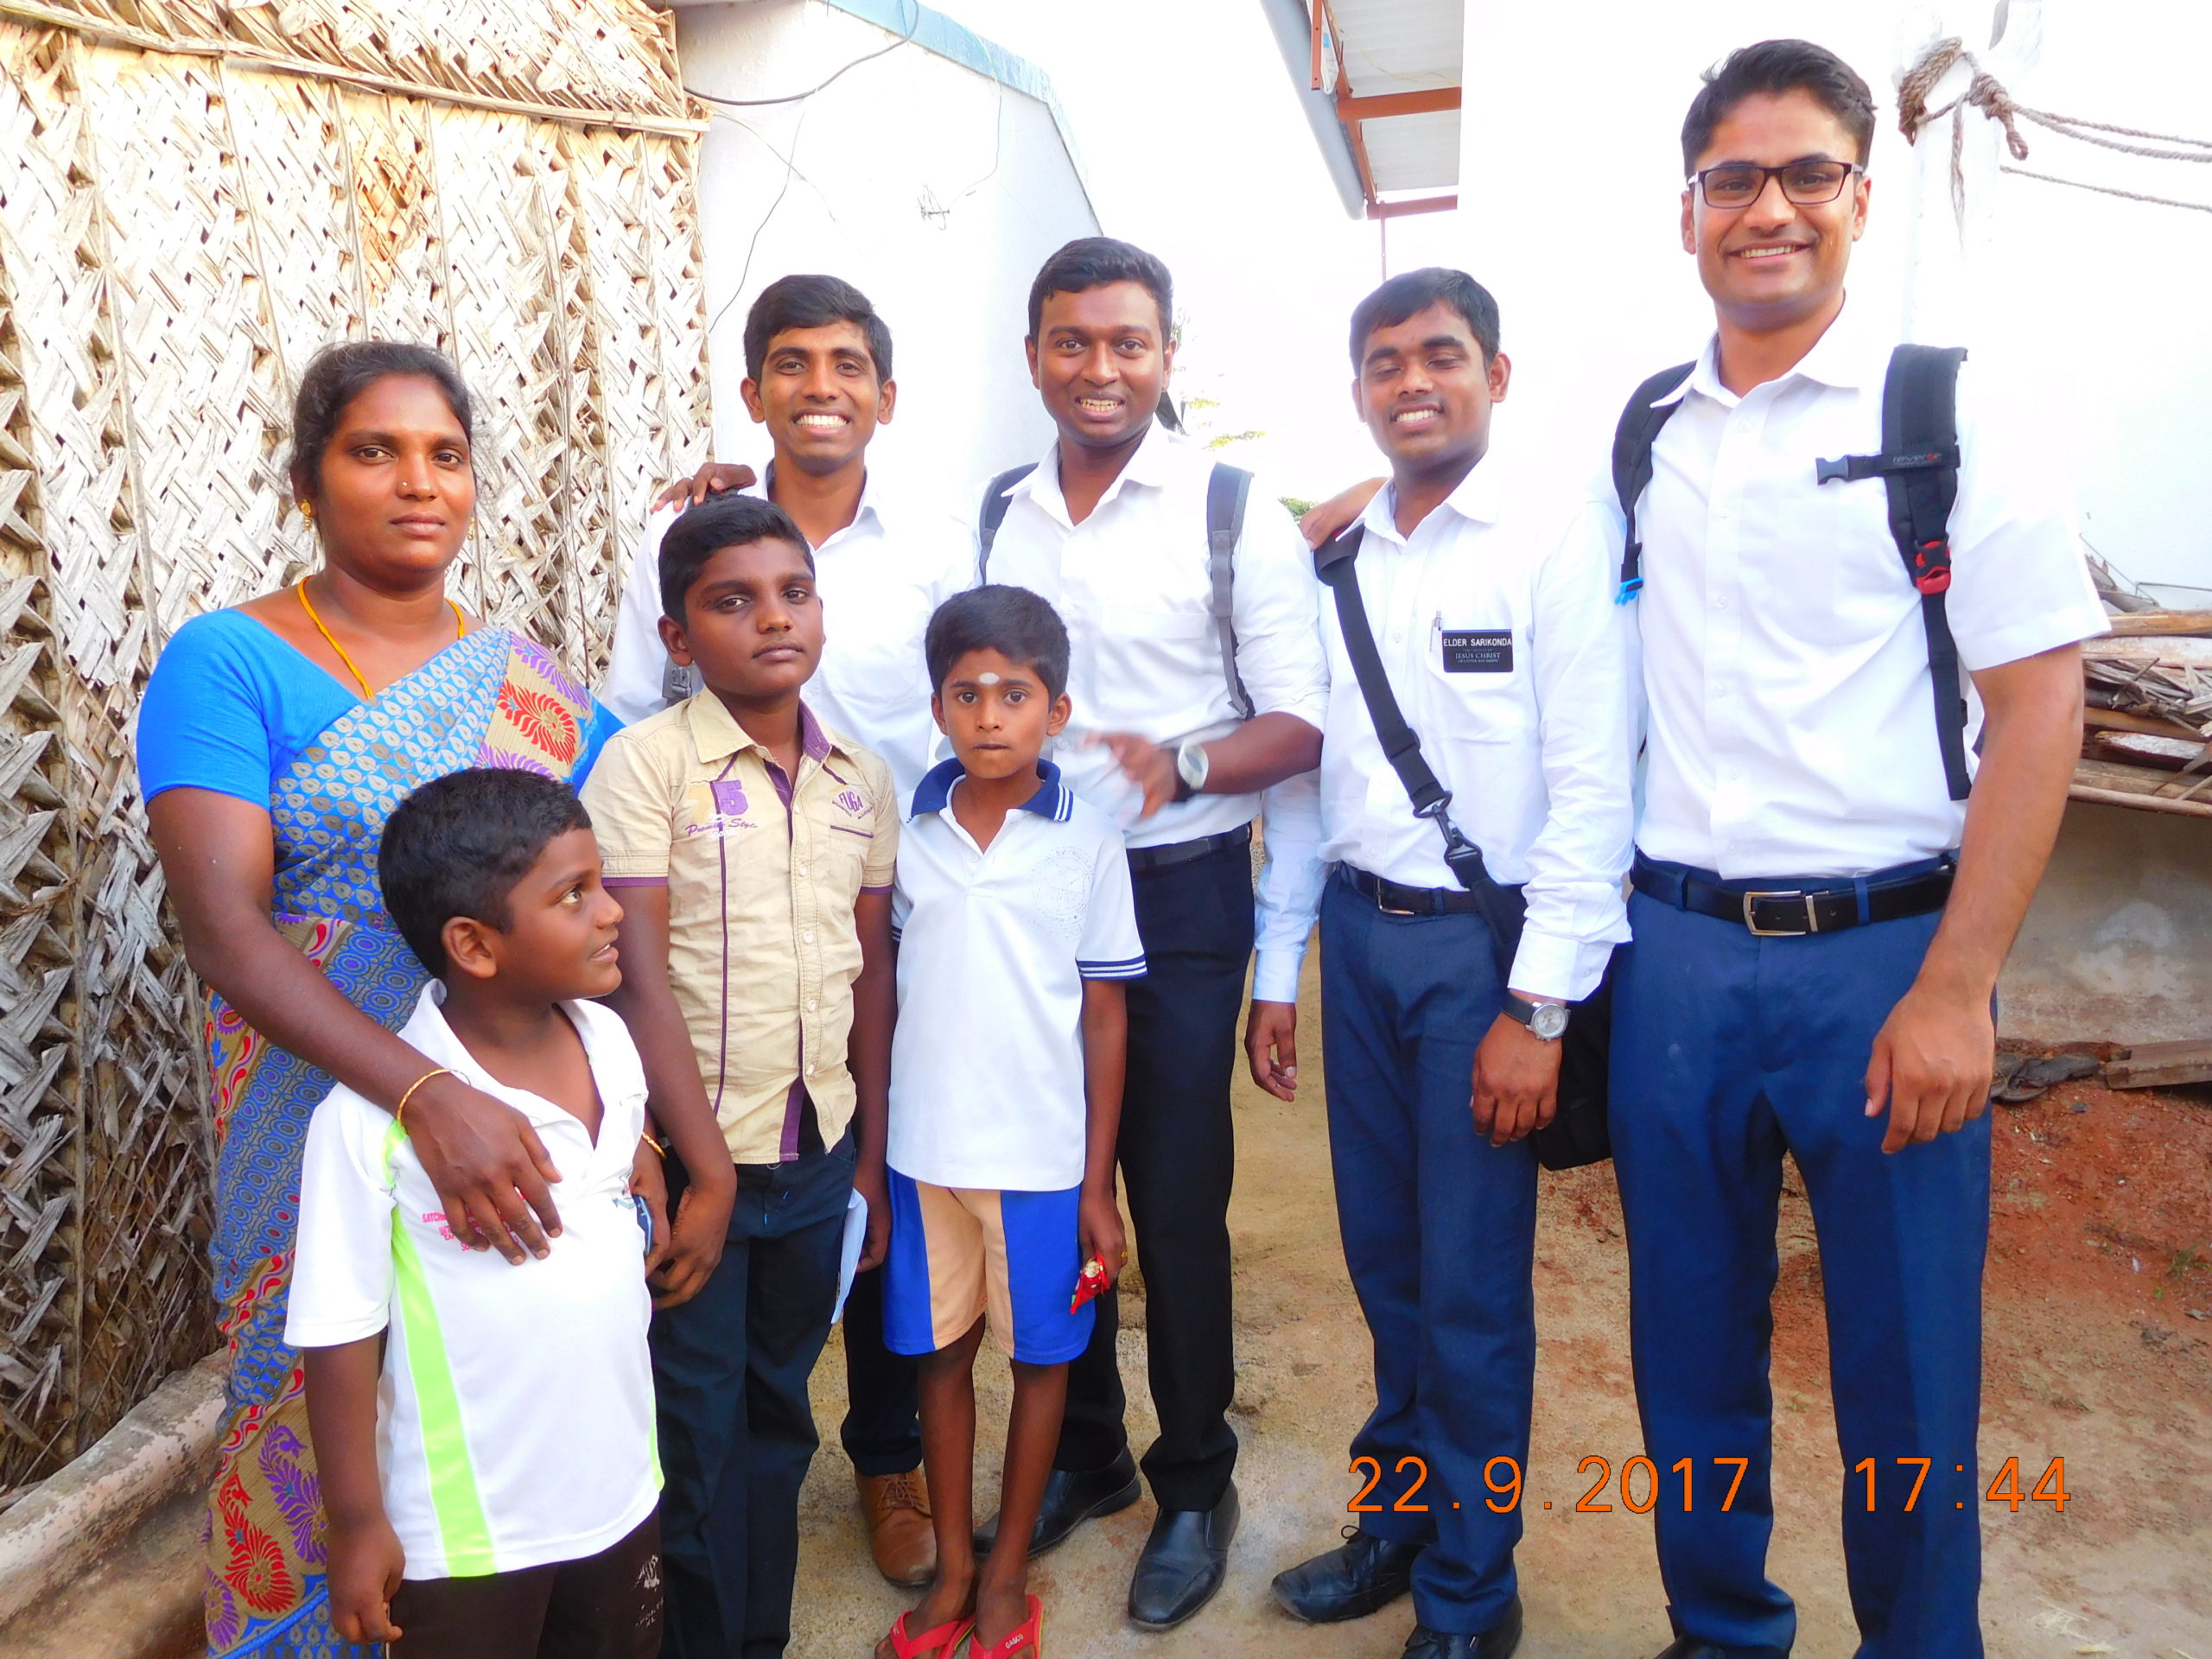 Chandra as a missionary